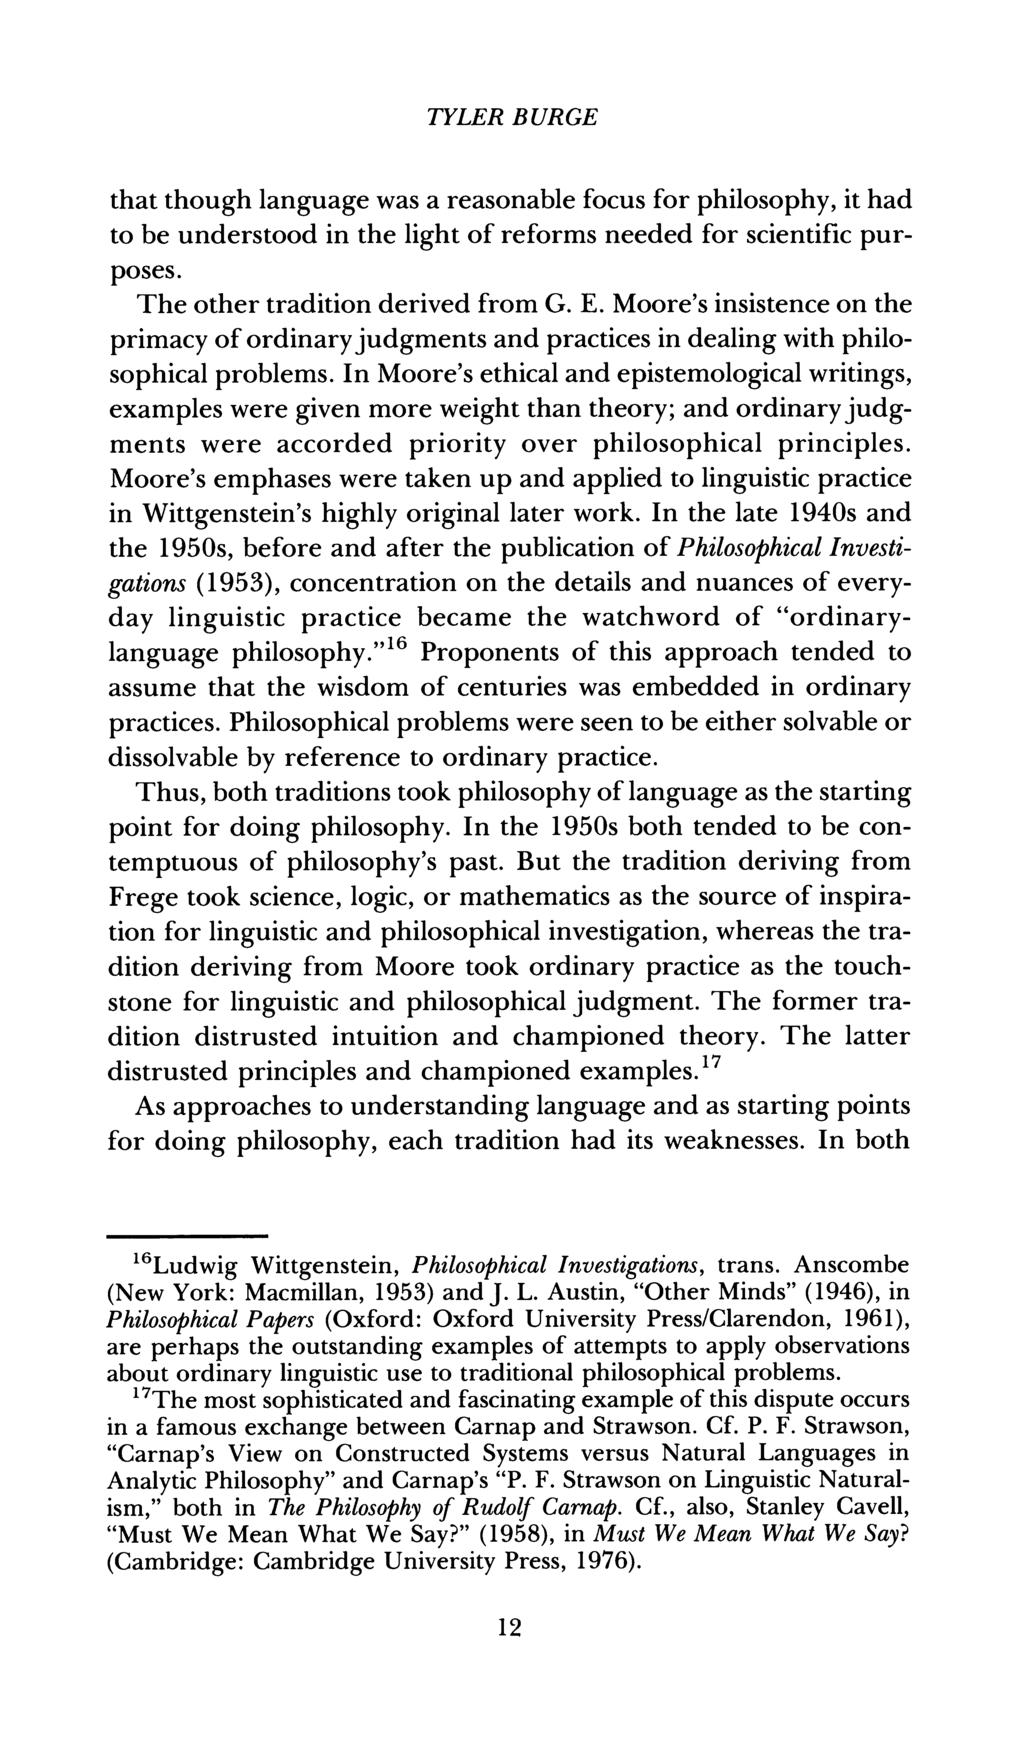 TYLER BURGE that though language was a reasonable focus for philosophy, it had to be understood in the light of reforms needed for scientific purposes. The other tradition derived from G. E.